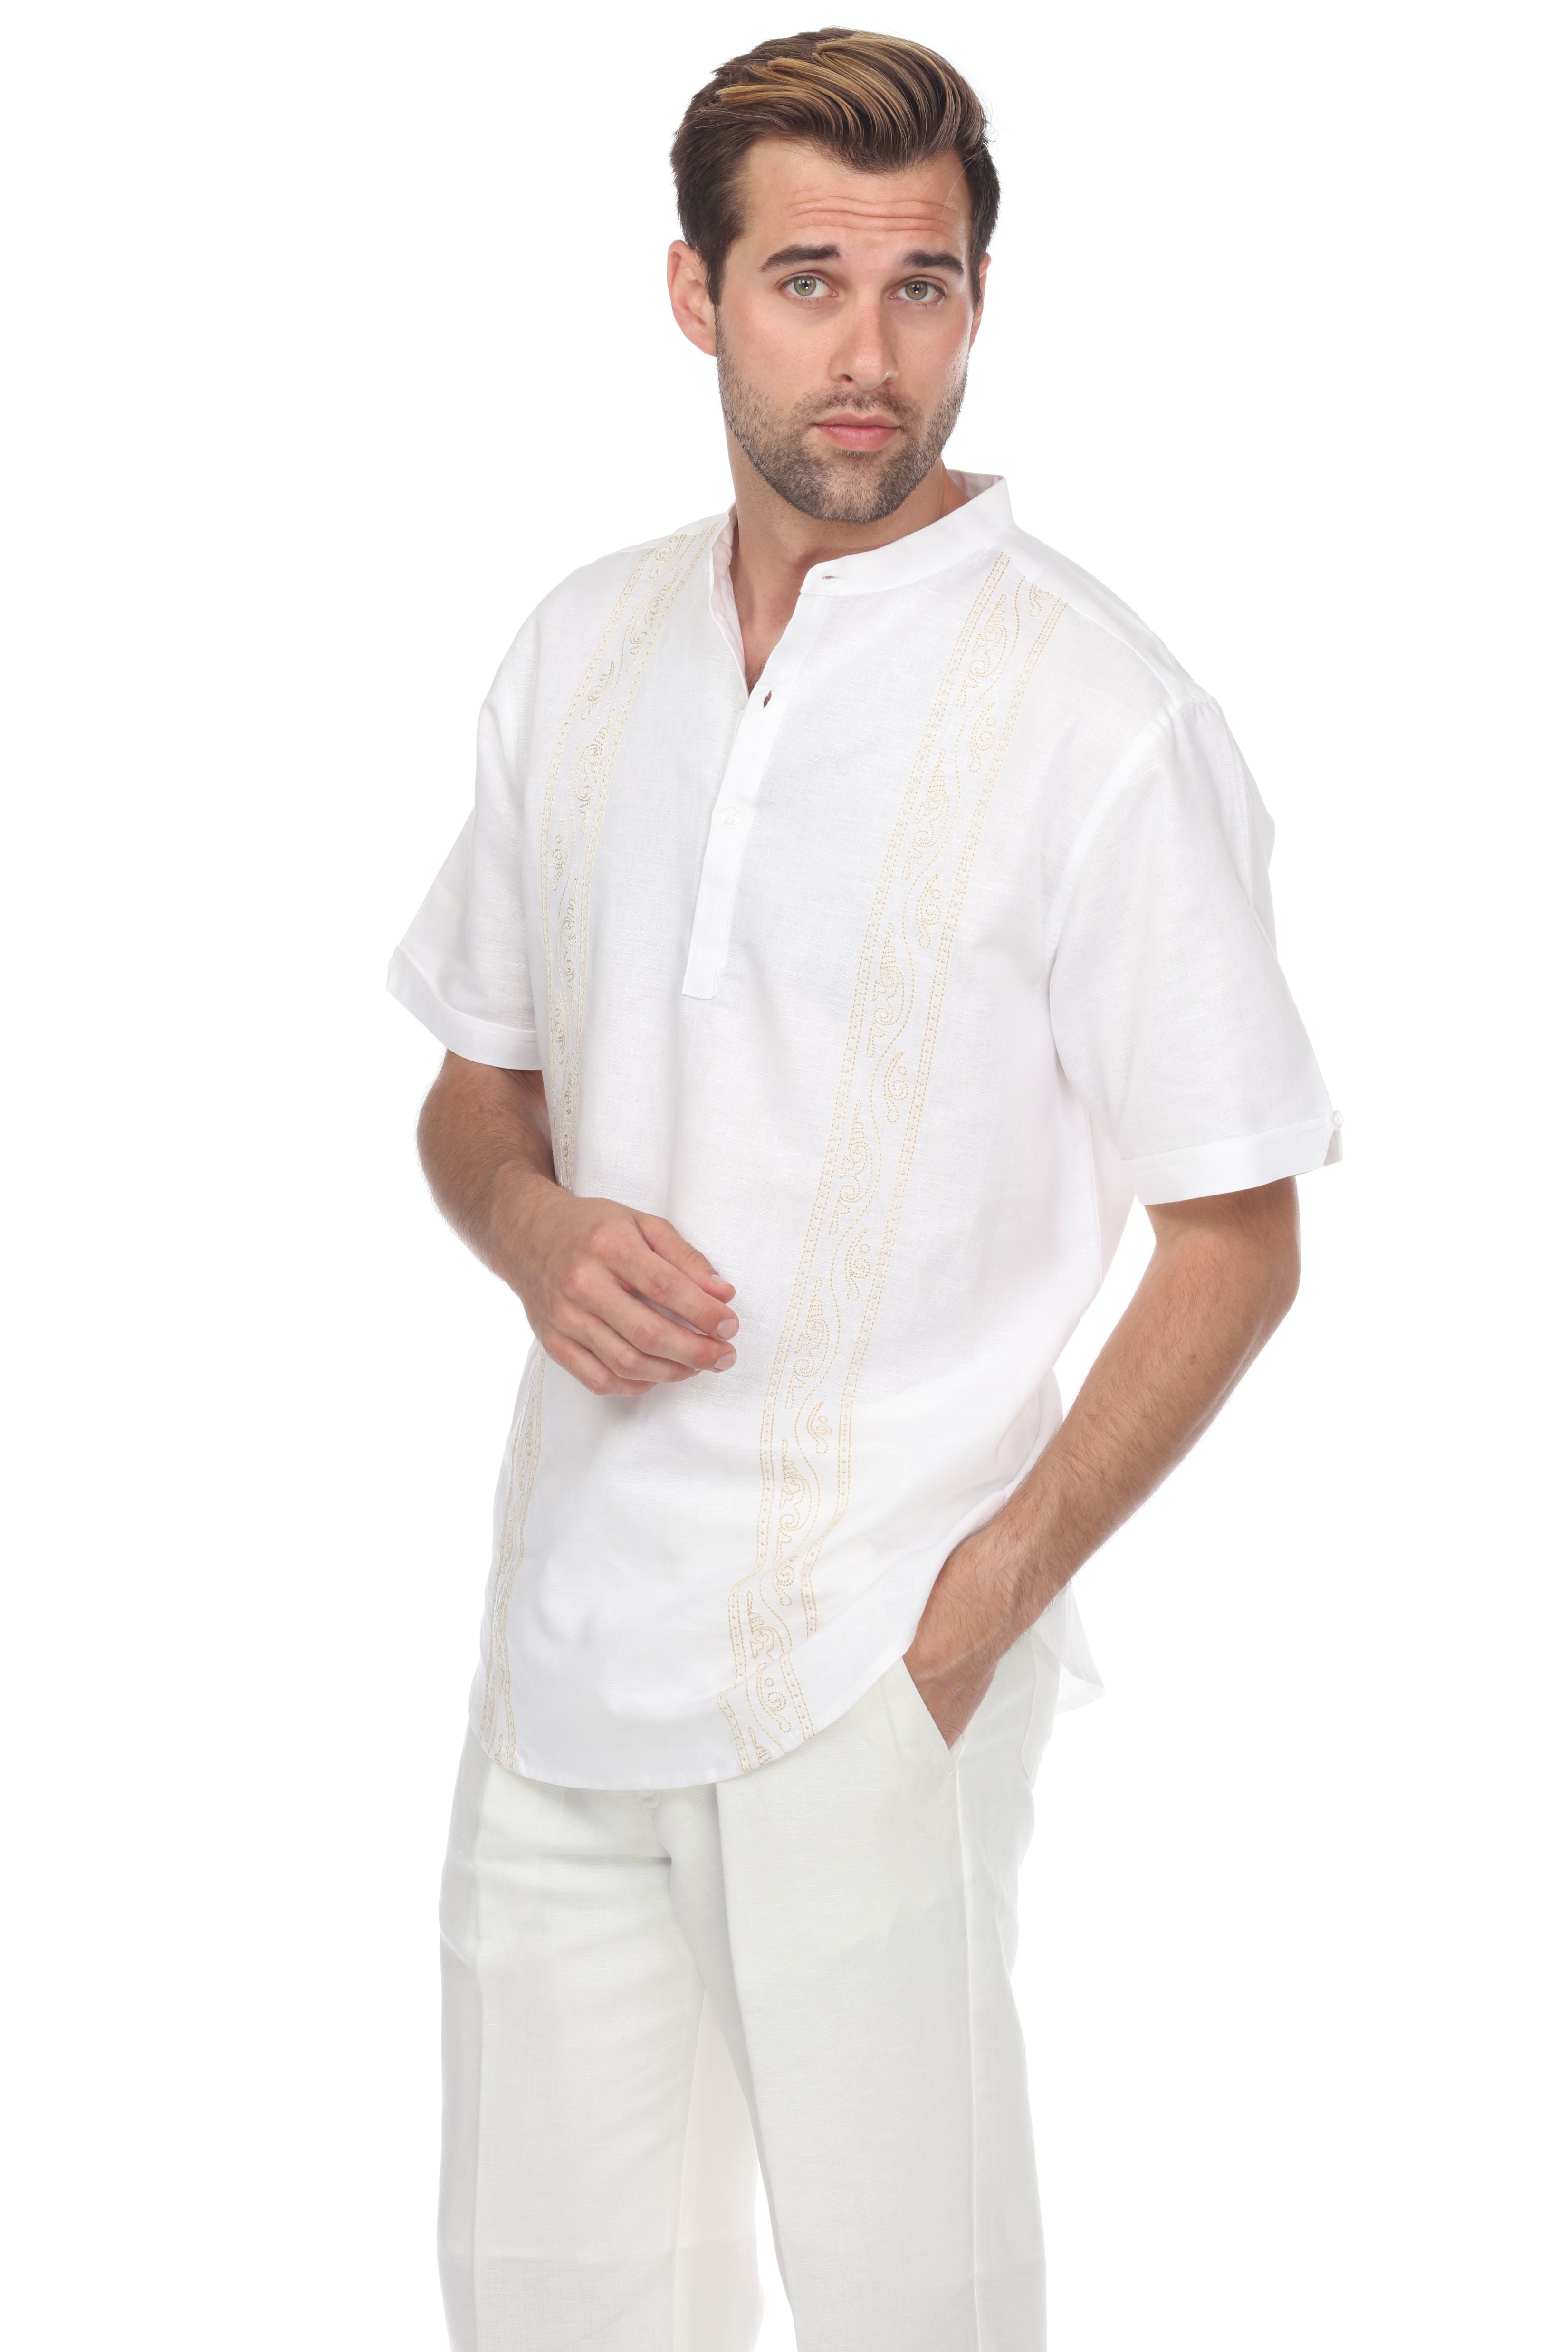 Casual Linen Blend Stitched Embroidery Mandarin Collar Henley Short Sleeve Shirt - Mojito Collection - Beachwear, Mens Shirt, Mojito Linen Shirt, Resort Wear, Short Sleeve Linen Shirt, Short 